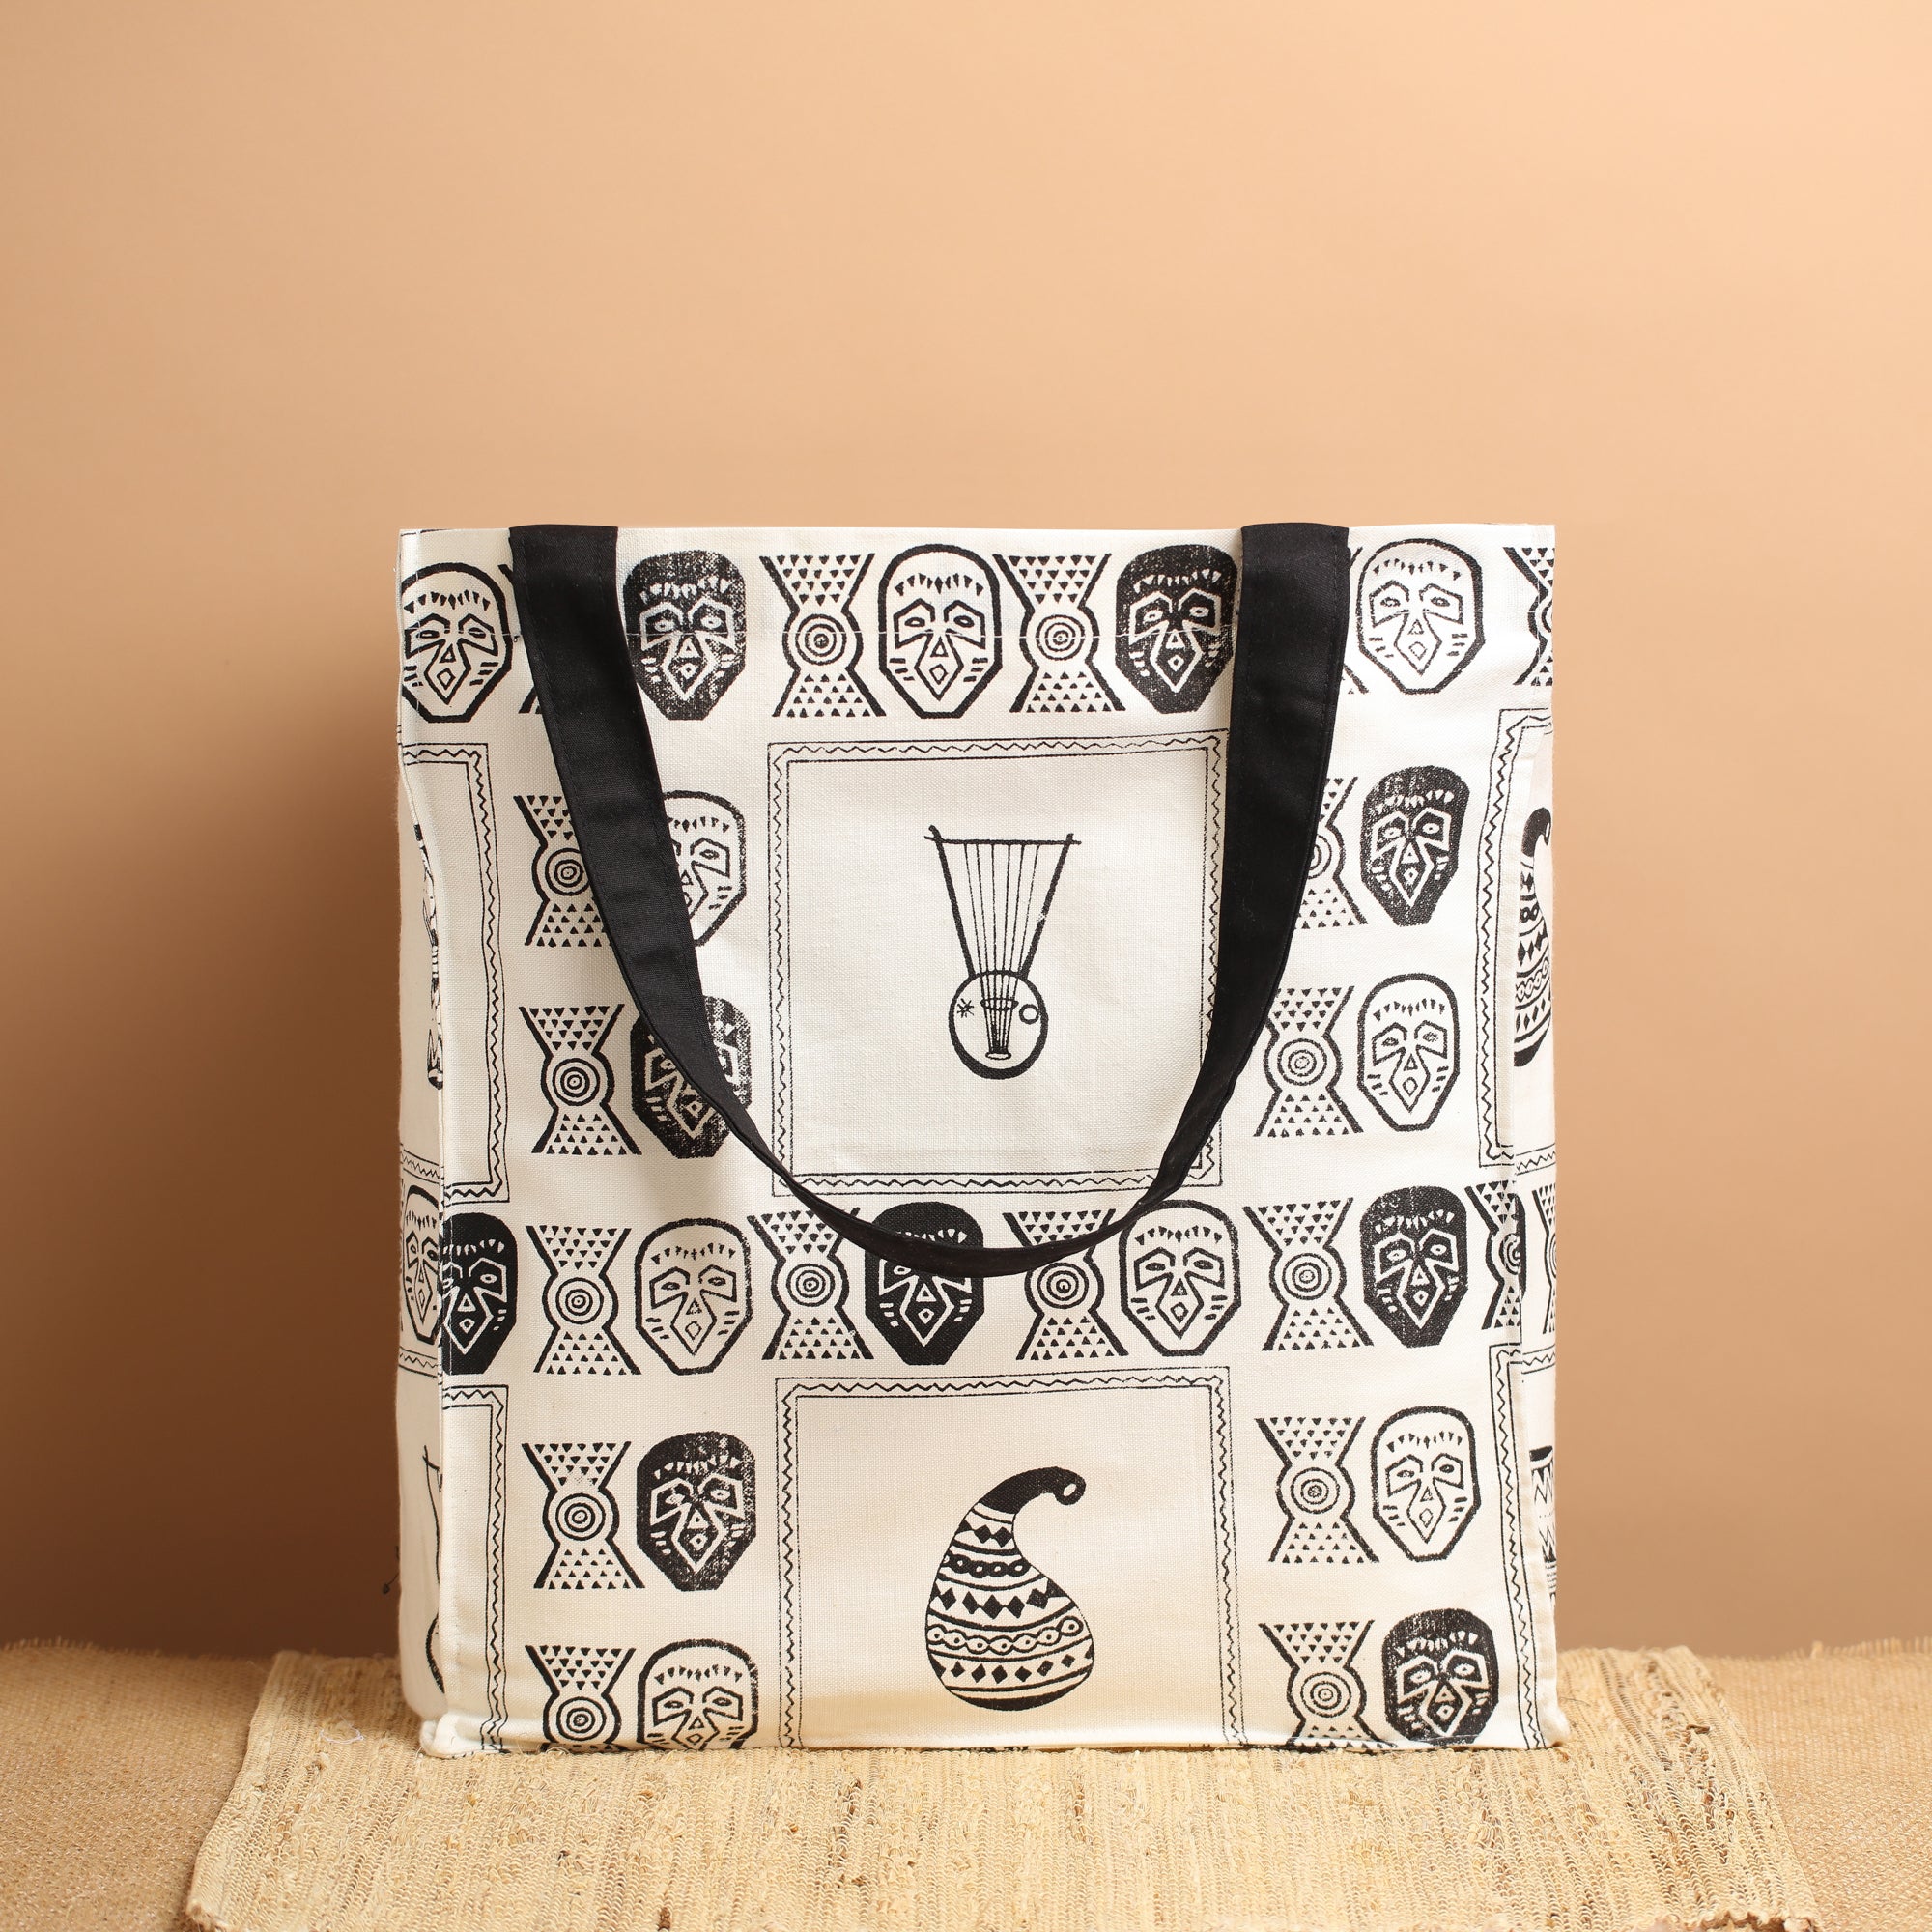 Buy 2 get 1 FREE | Canvas Tote Bags